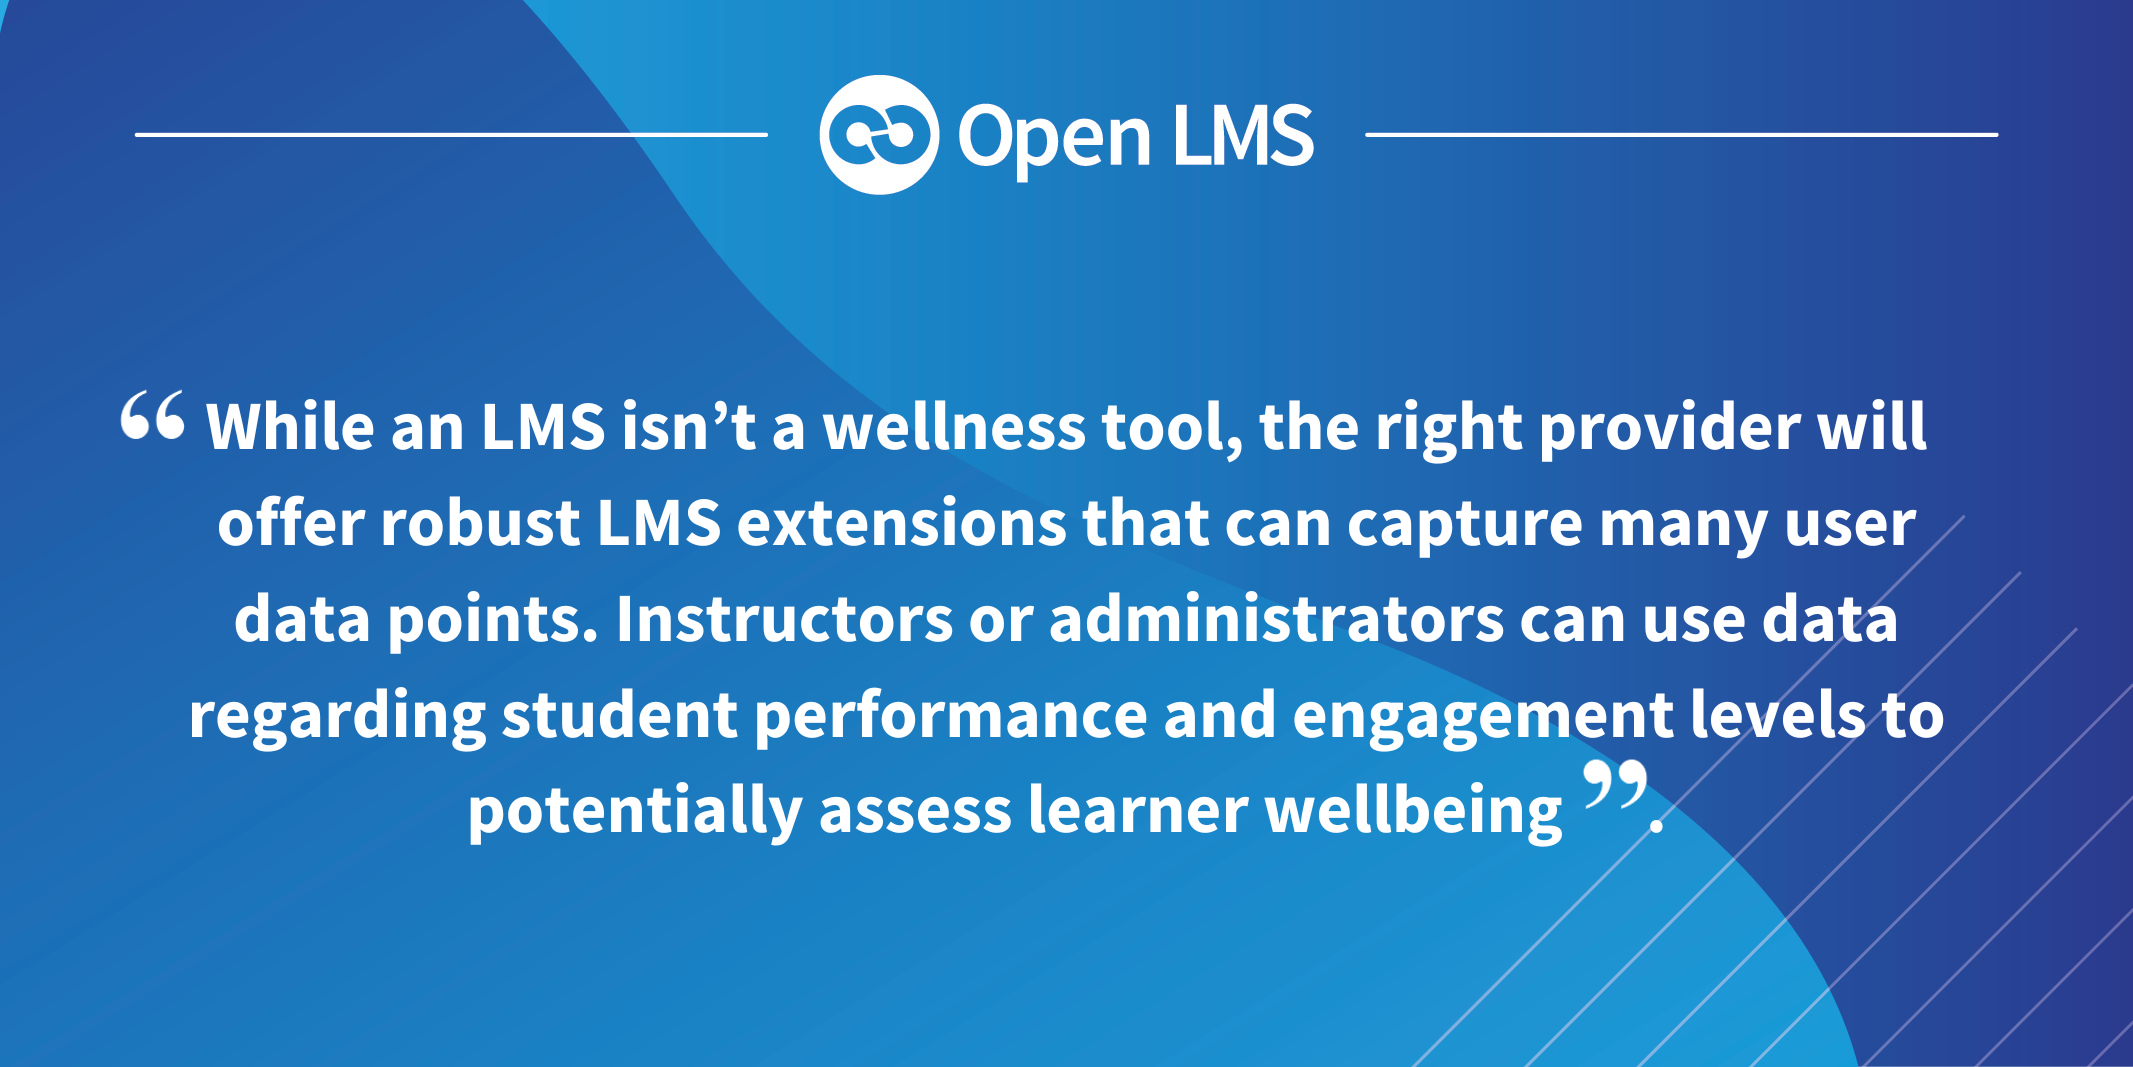 While an LMS isn’t a wellness tool, the right provider will offer robust LMS extensions that can capture many user data points. Instructors or administrators can use data regarding student performance and engagement levels to potentially assess learner wellbeing